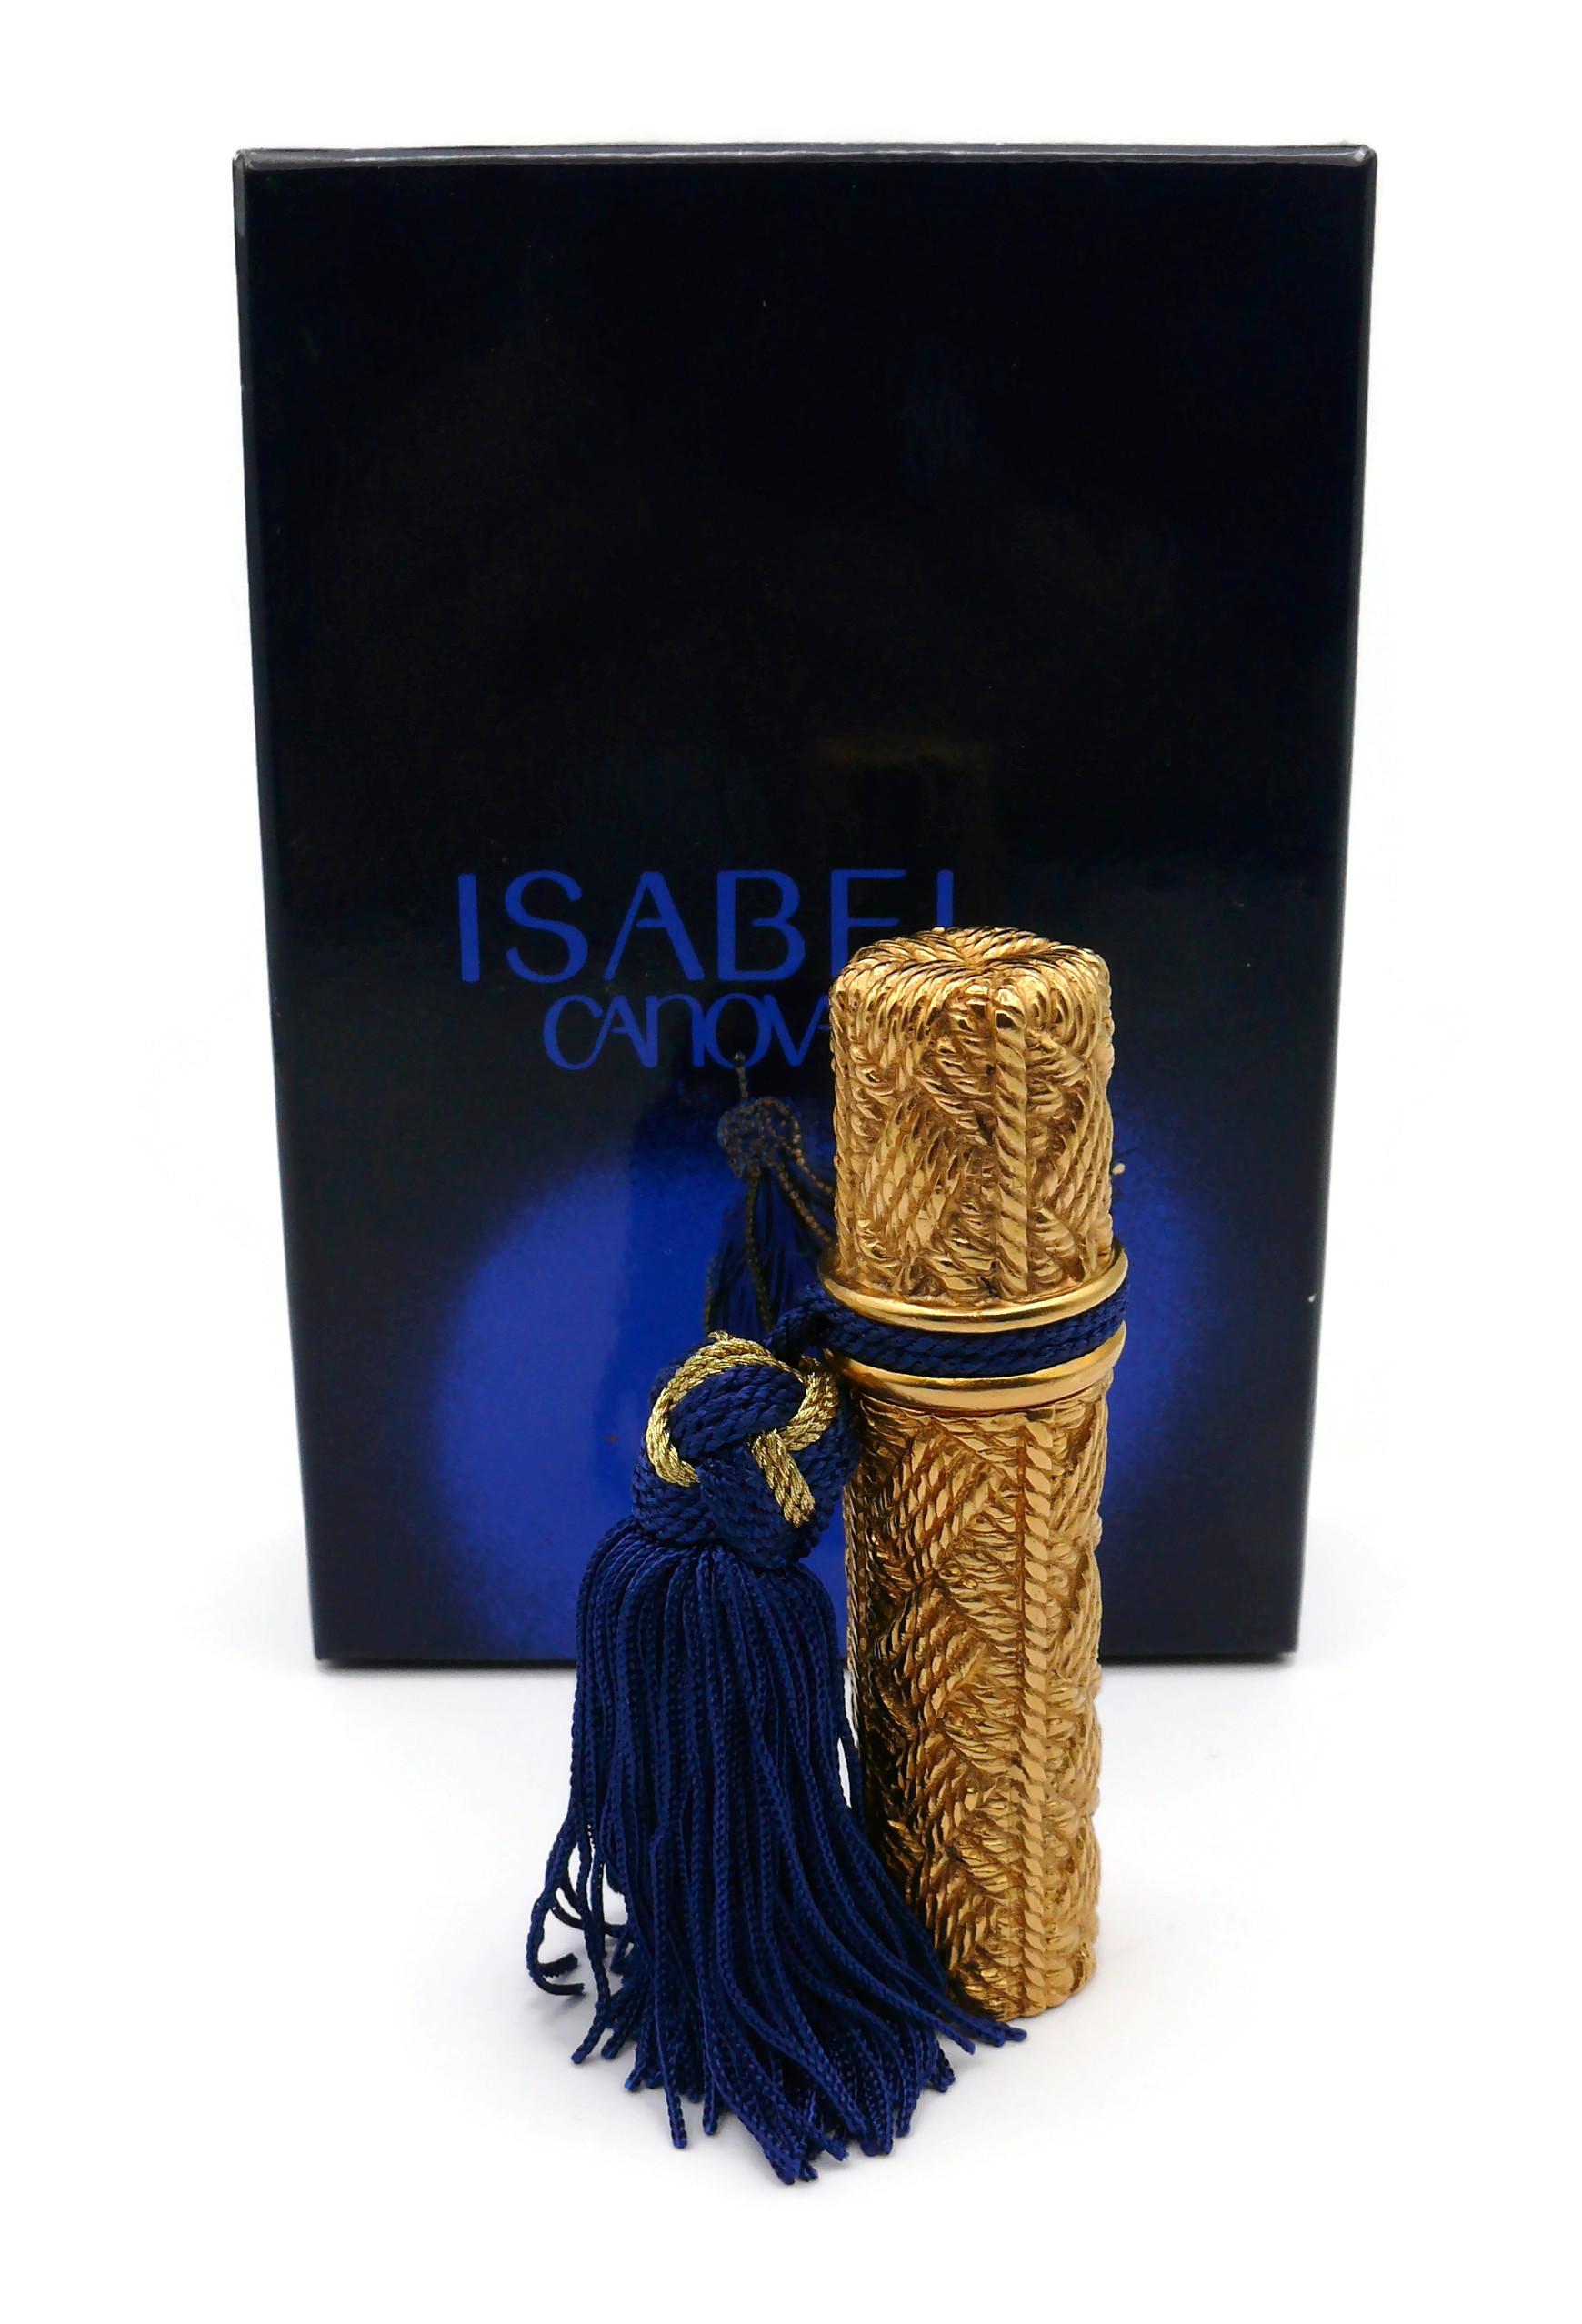 ISABEL CANOVAS Parfum by ROBERT GOOSSENS vintage atomizer featuring a gold tone metal wickerwork design embellished with an attached blue and gold tassel.

Embossed ISABEL CANOVAS PARIS Made in France.

IMPORTANT INFORMATION
- The ISABEL CANOVAS